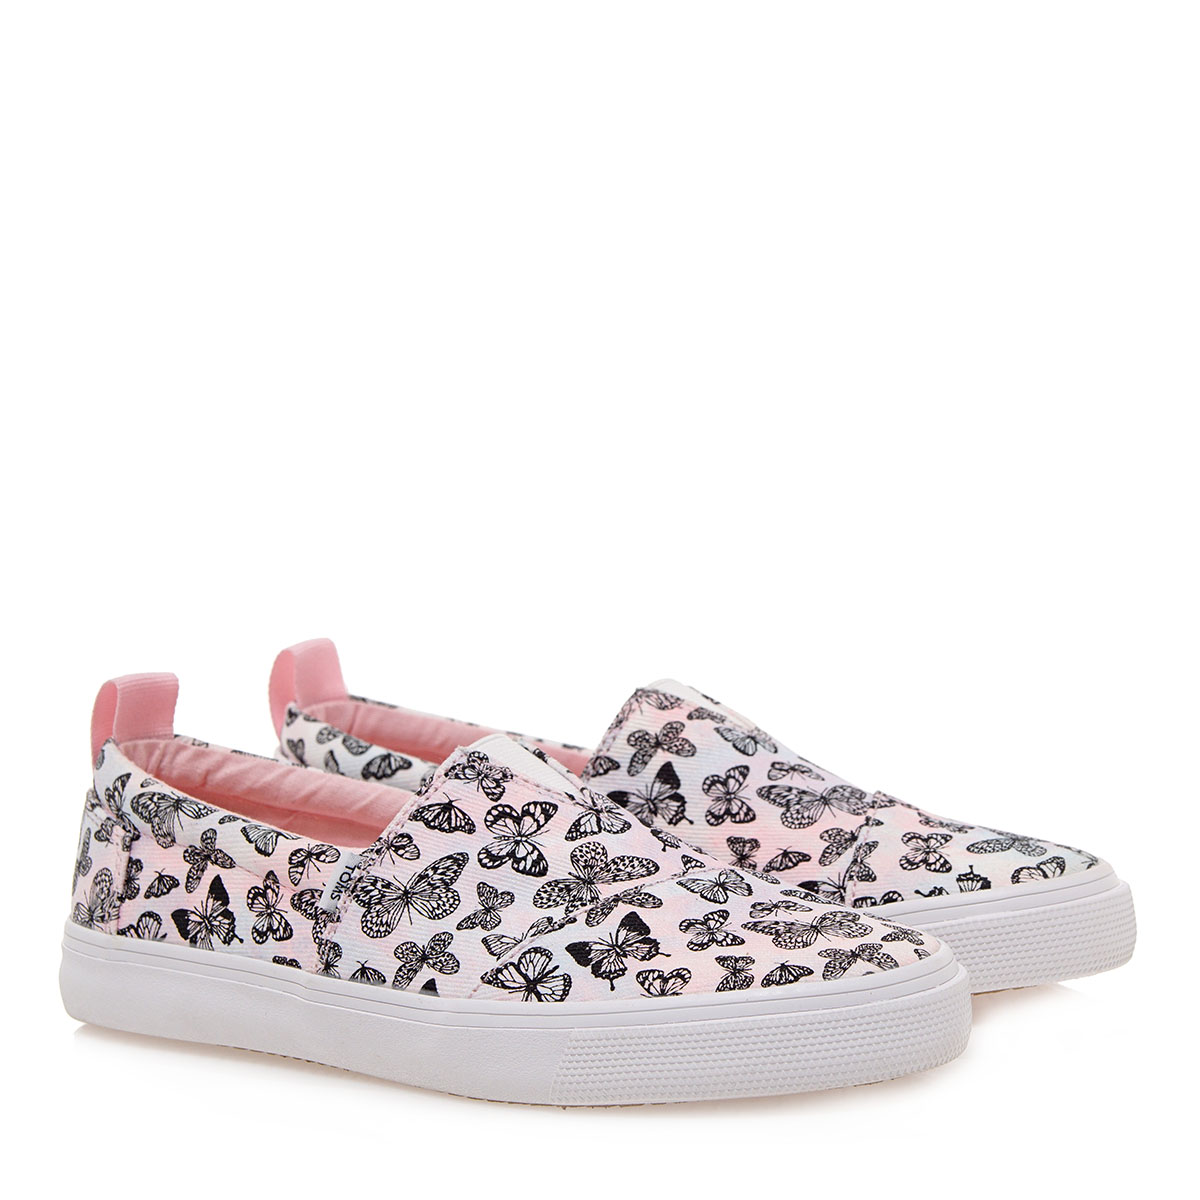 TOMS Girl's shoes - 2